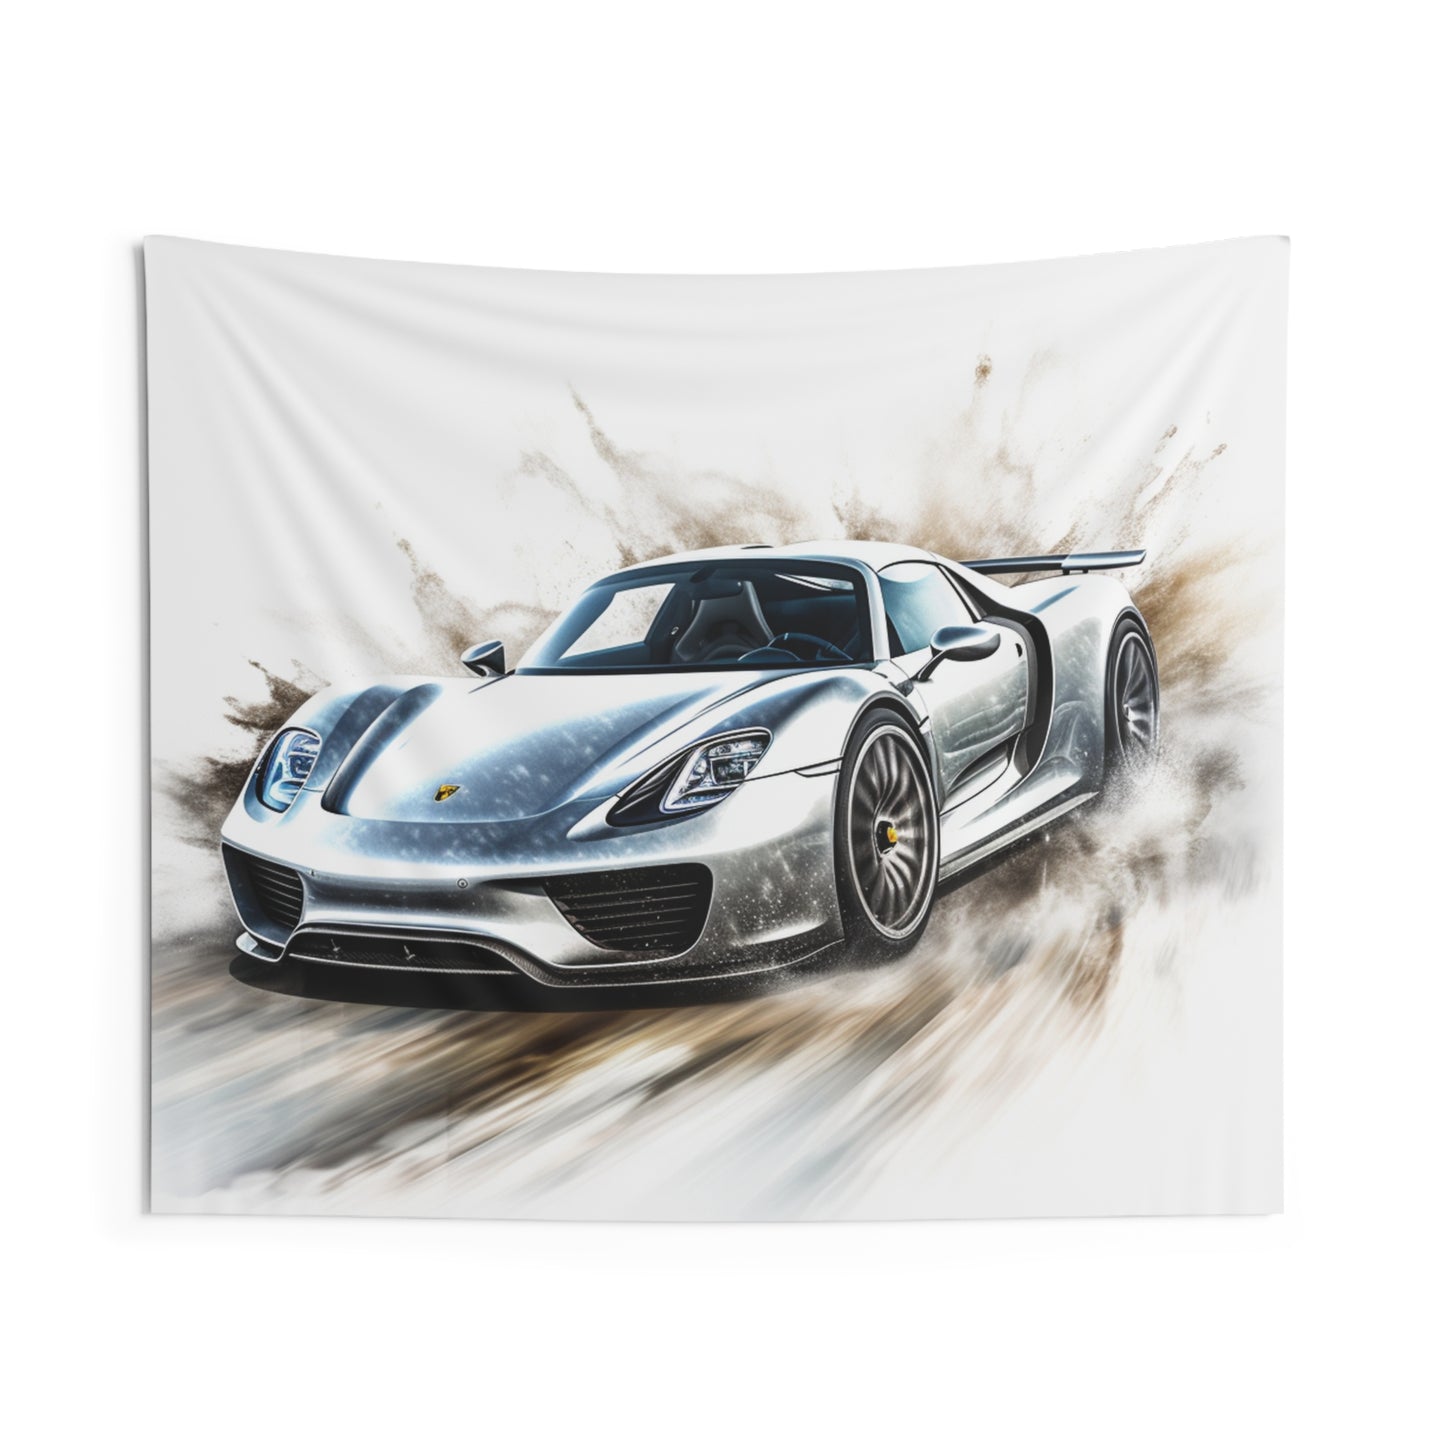 Indoor Wall Tapestries 918 Spyder white background driving fast with water splashing 2